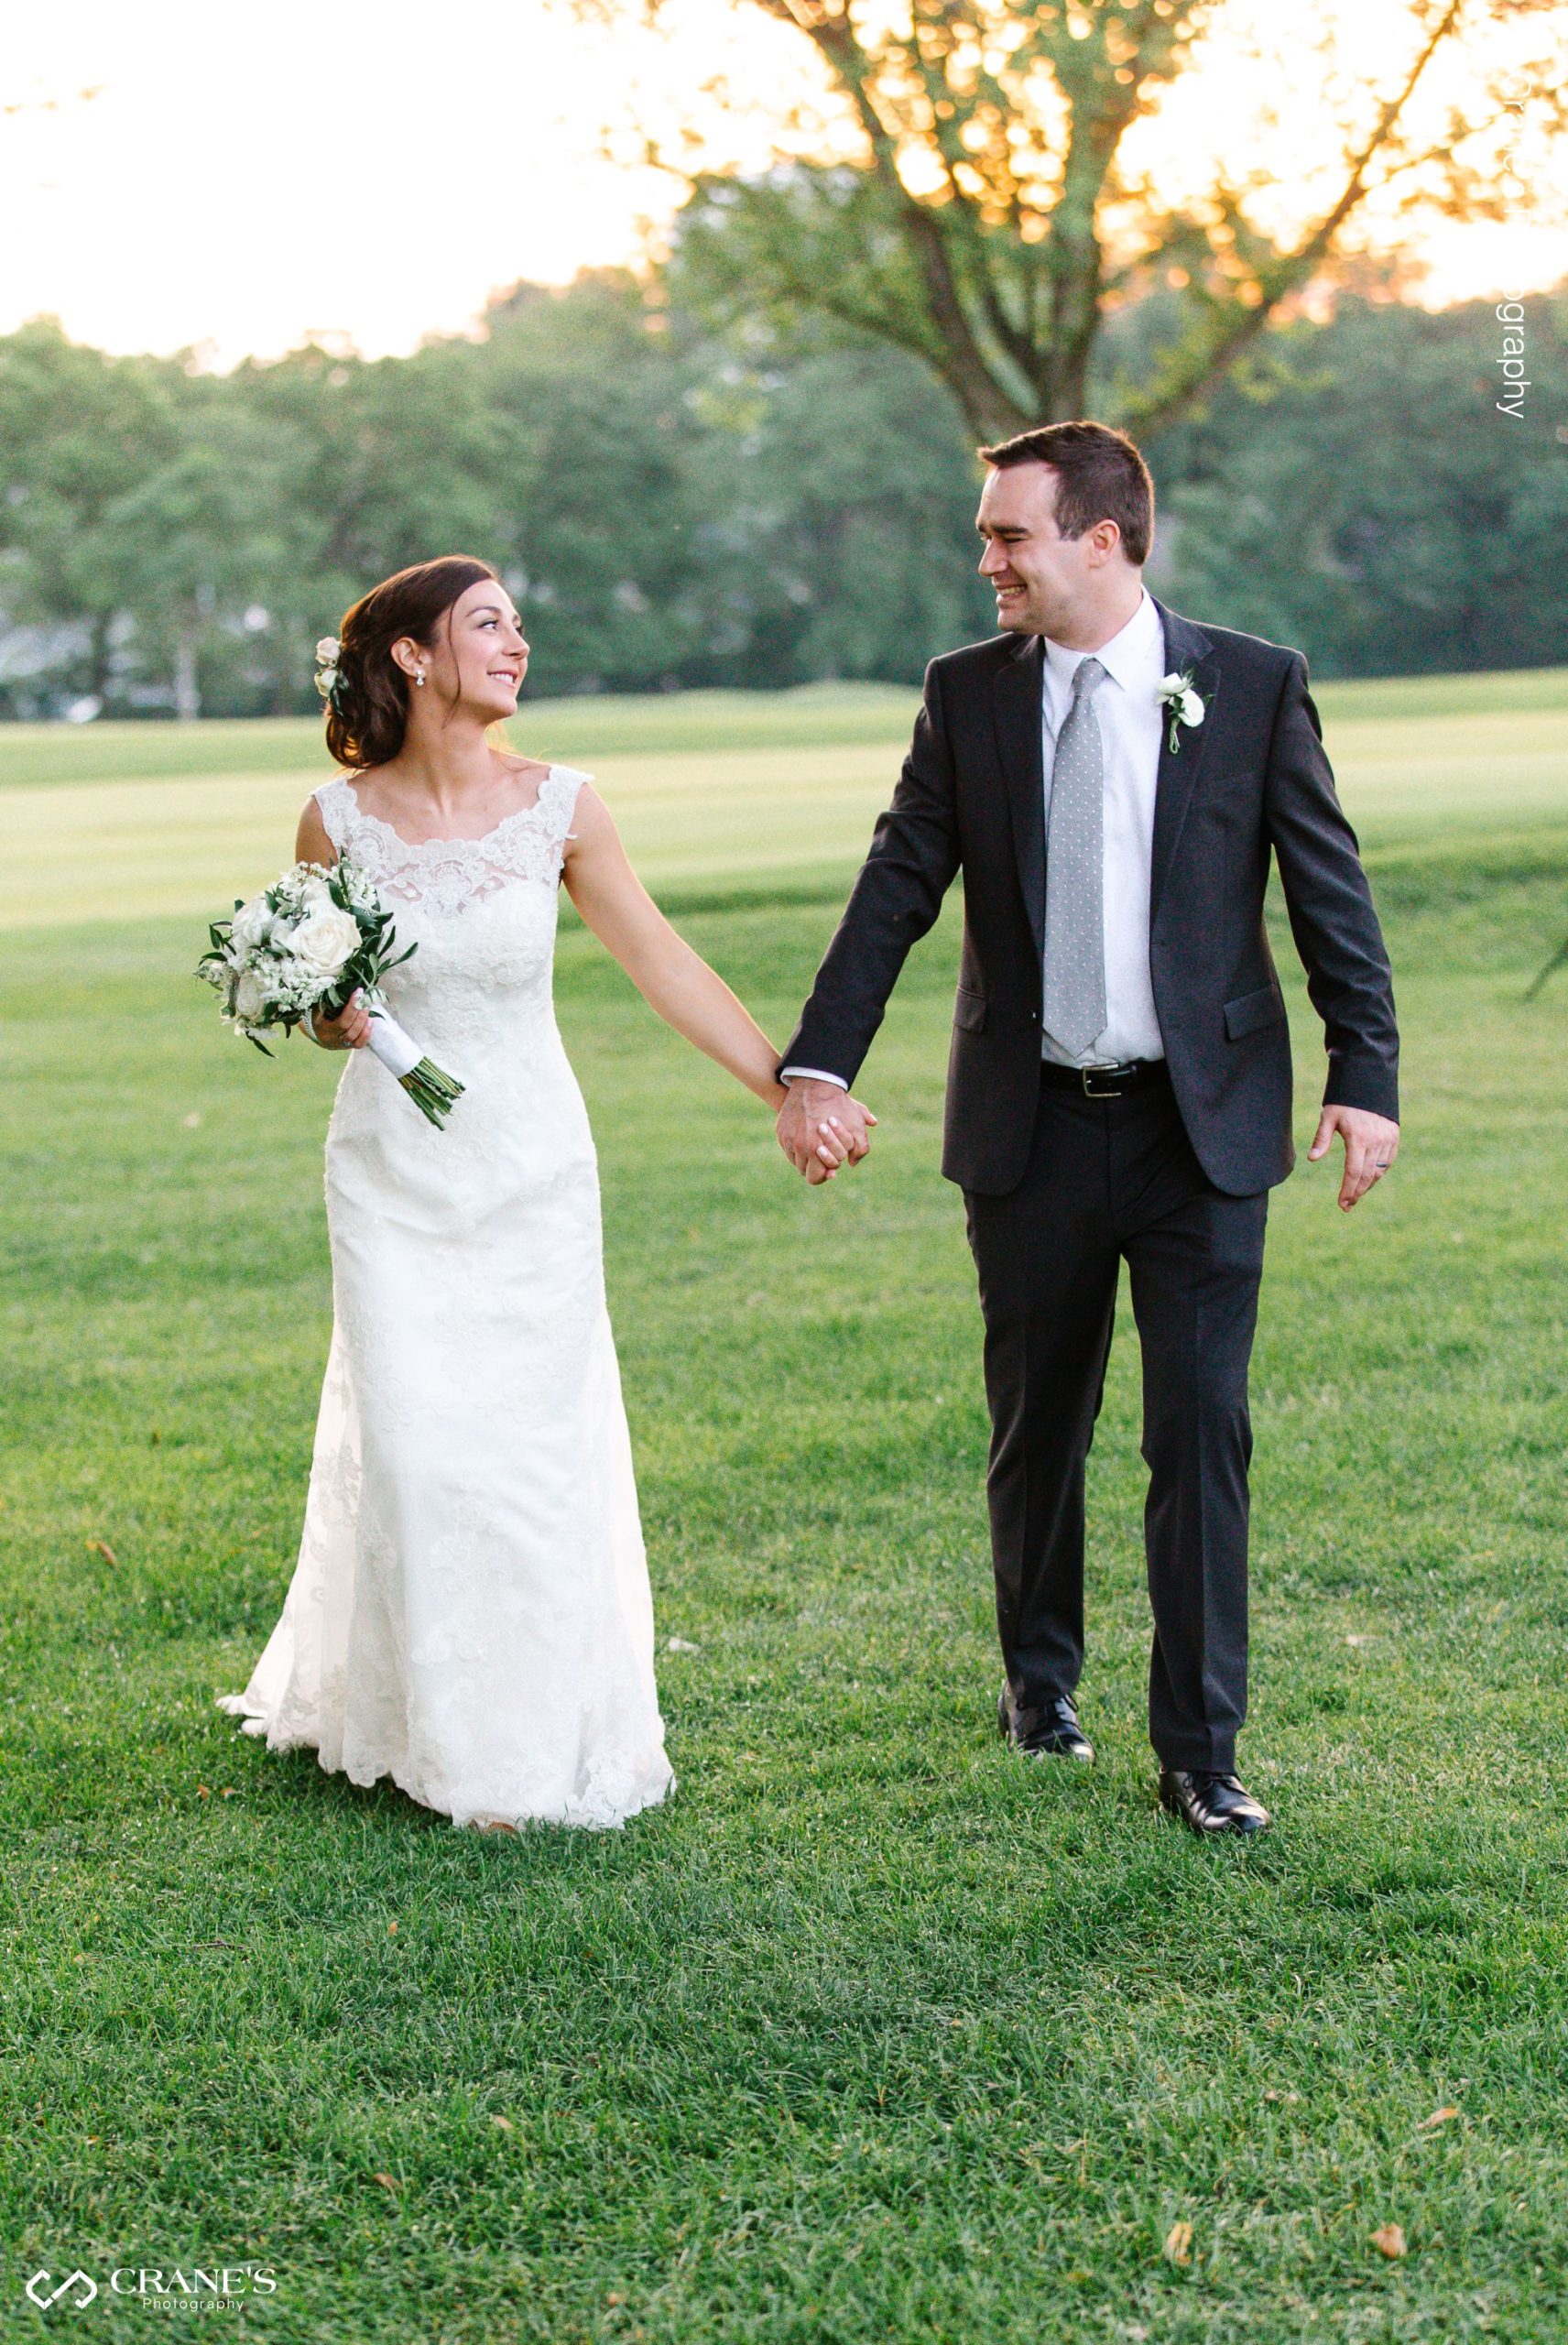 Bride and groom walking during the golden hour at La Grange Country Club